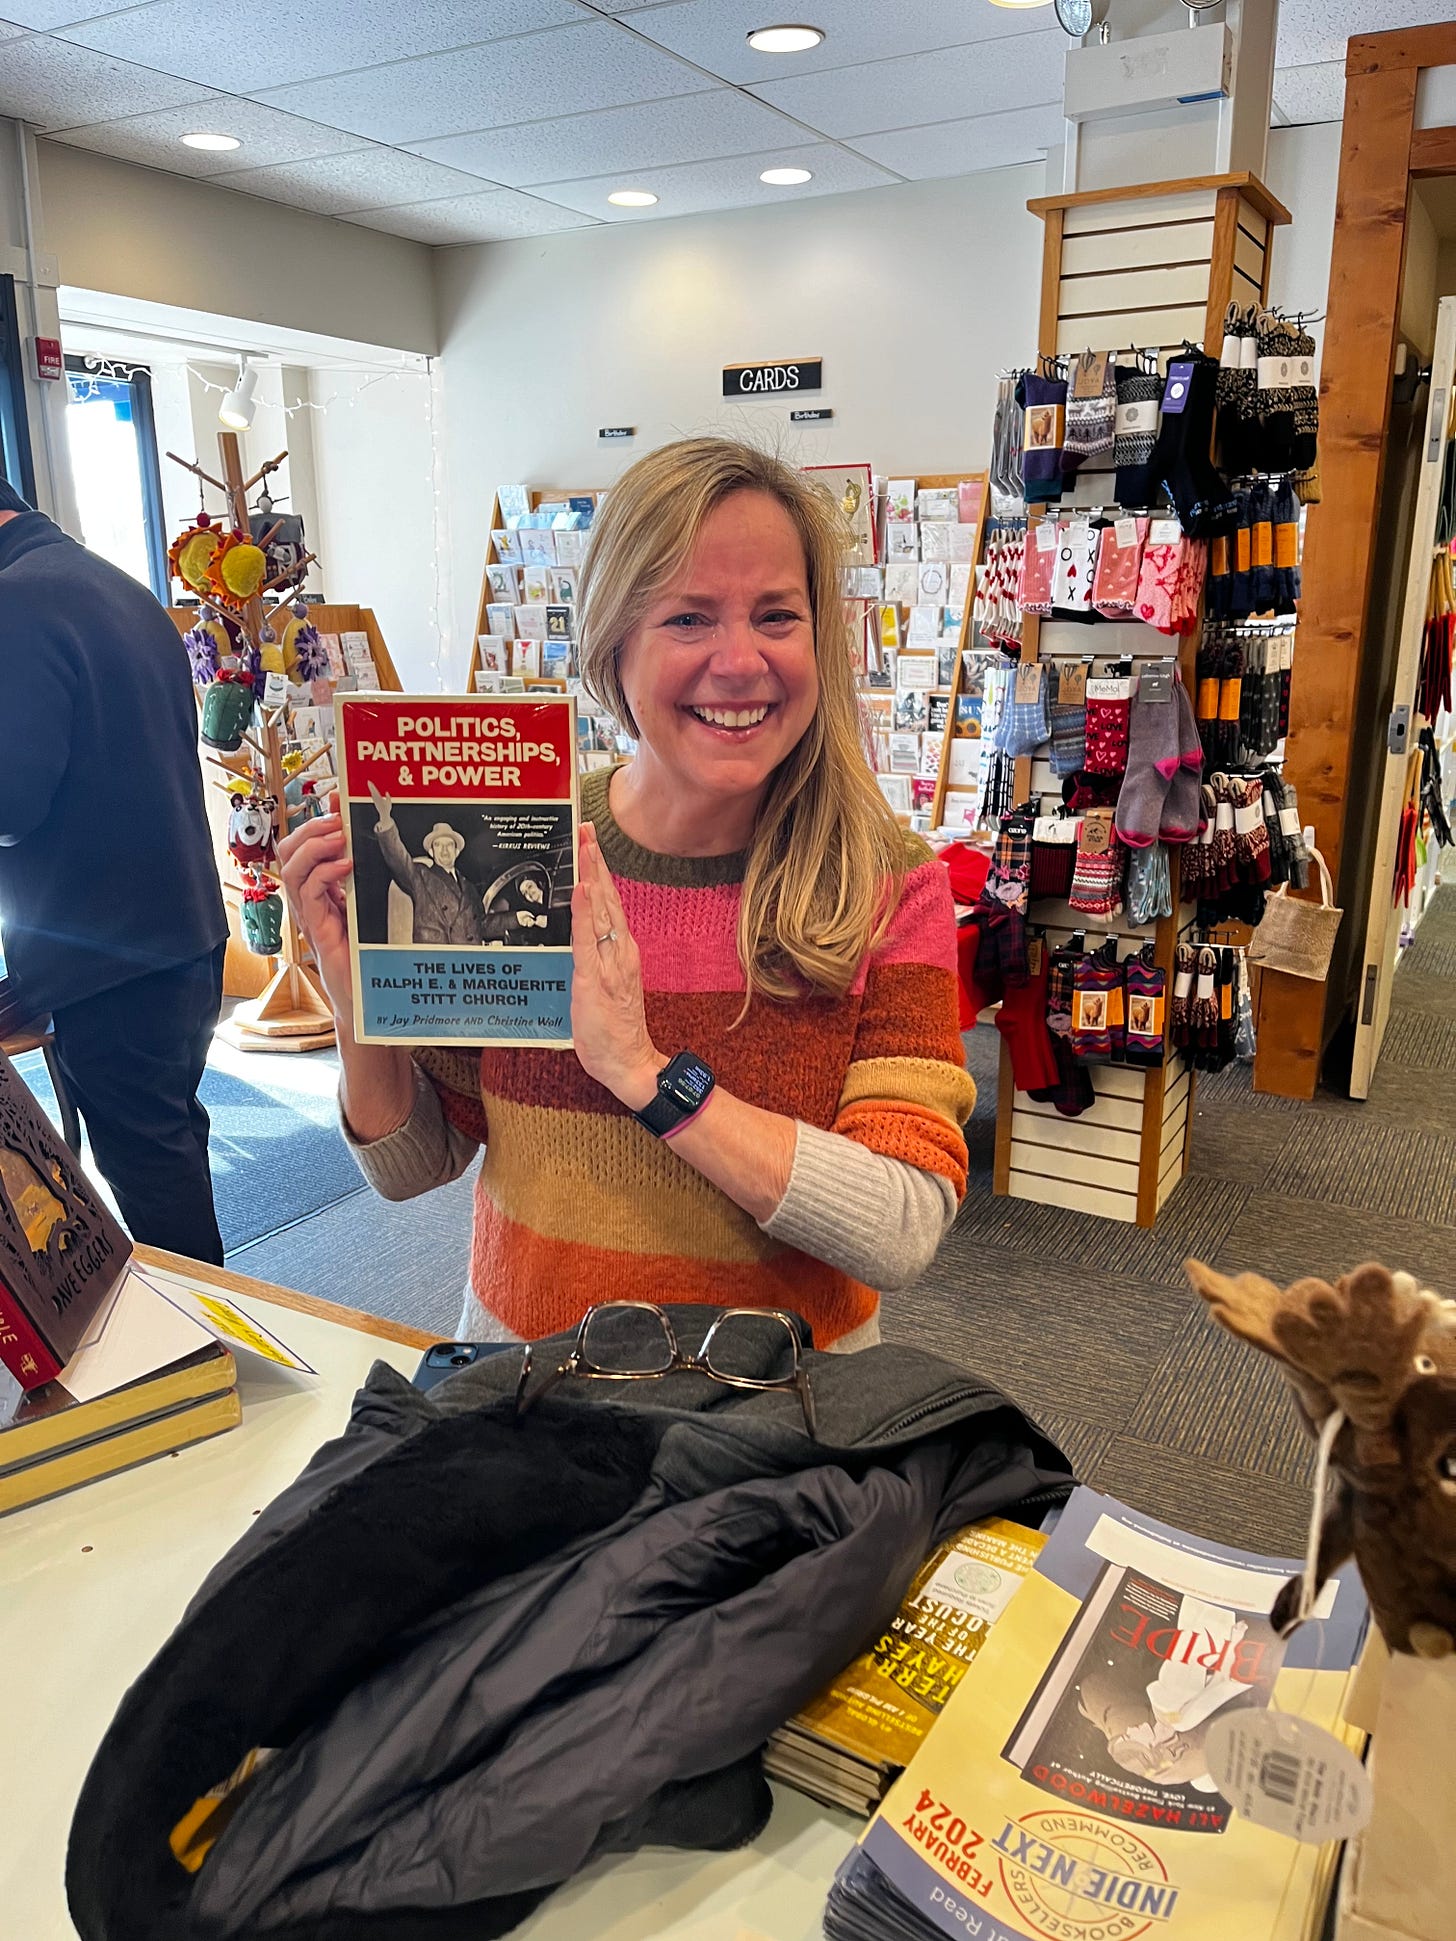 Memoir Coach Christine Wolf holds a copy of her debut book, Politics, Partnerships, & Power: The Lives of Ralph E. and Marguerite Stitt Church in the independent bookstore The Book Stall in Winnetka, Illinois. Wolf is wearing a striped sweater and crying. She's standing in front of a rack of socks and greeting cards.